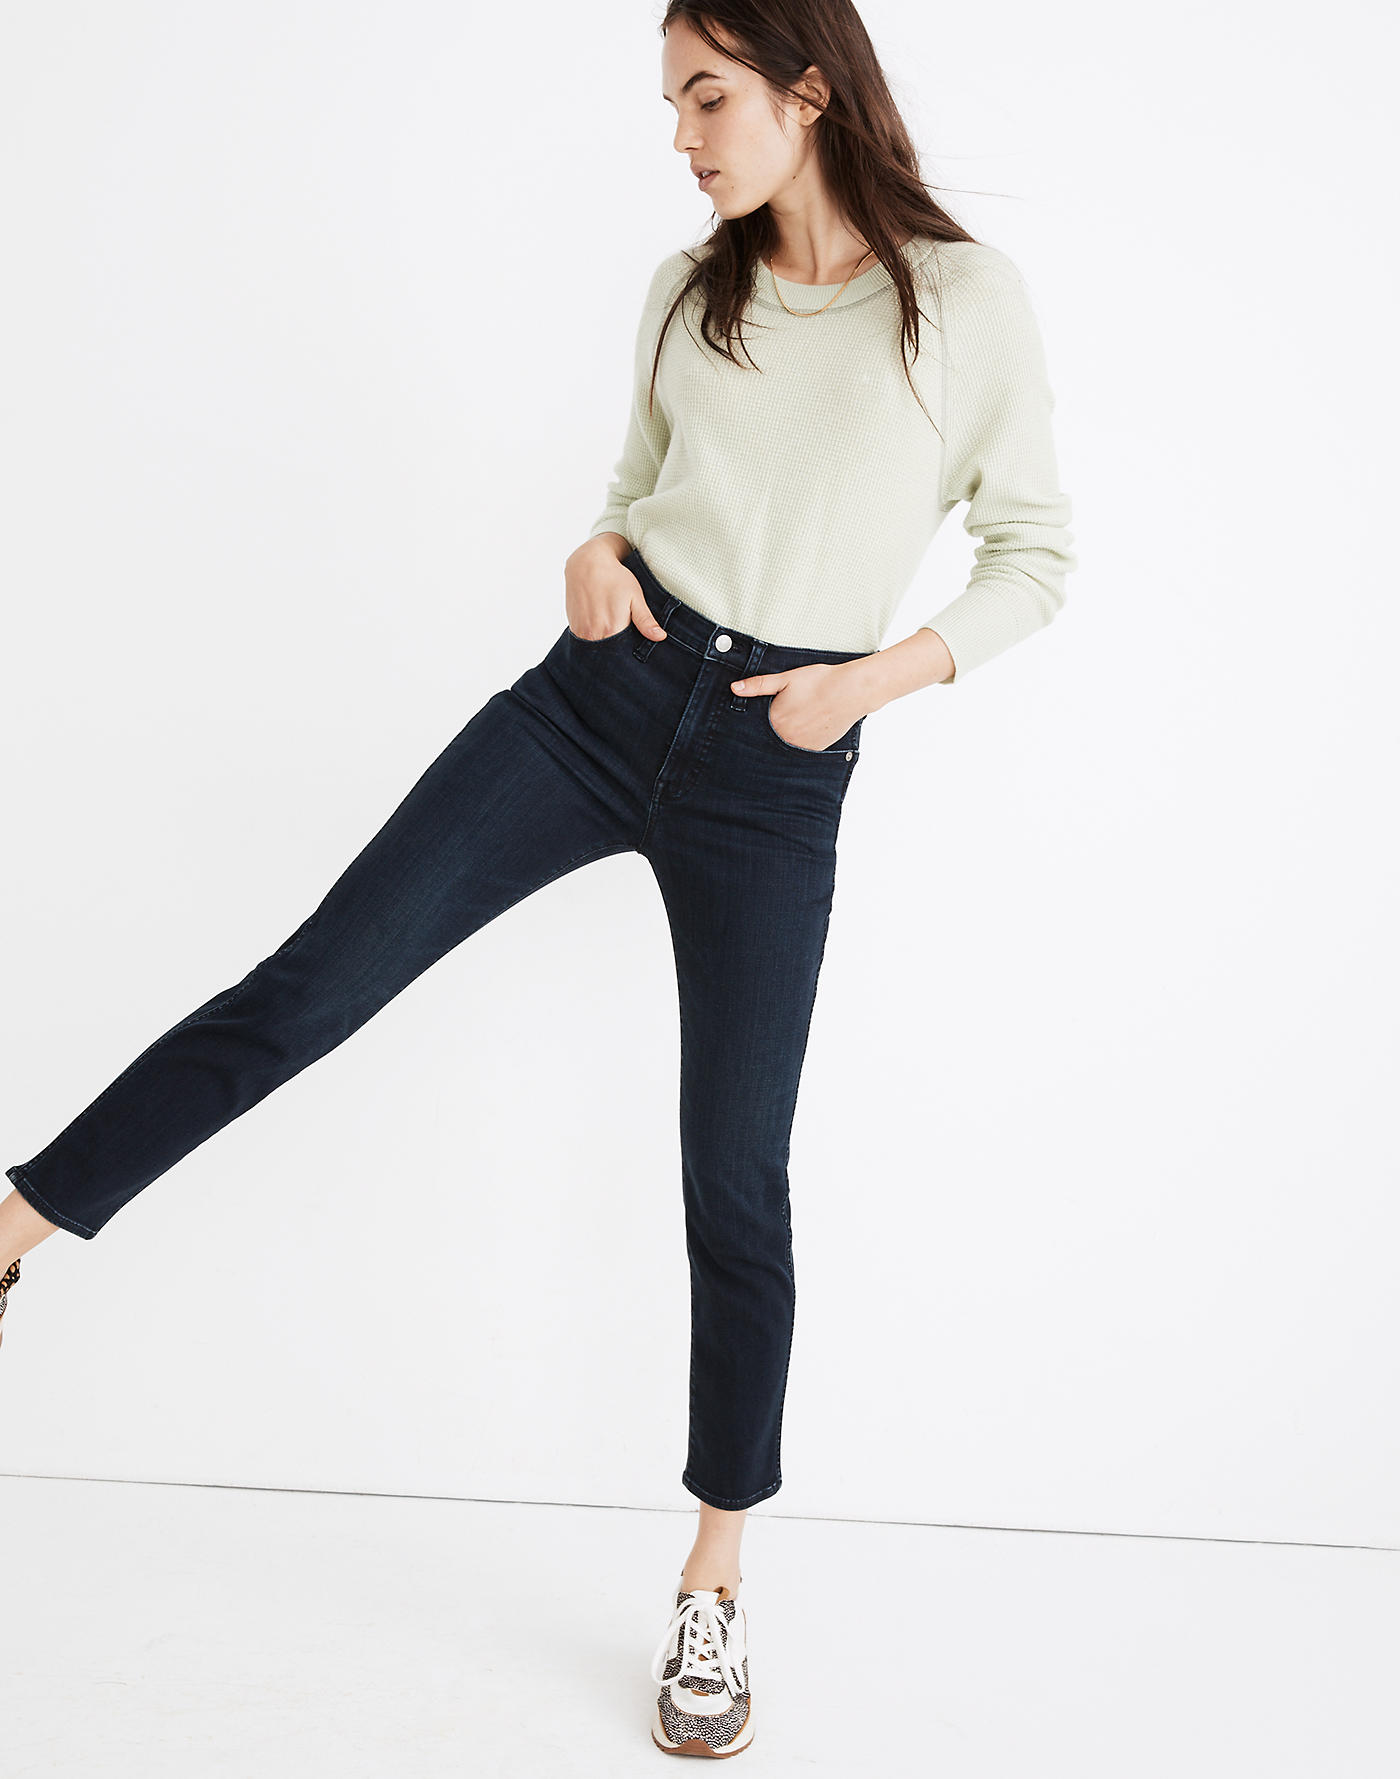 Madewell Stovepipe Jeans in Macintosh Wash: TENCEL Denim Edition